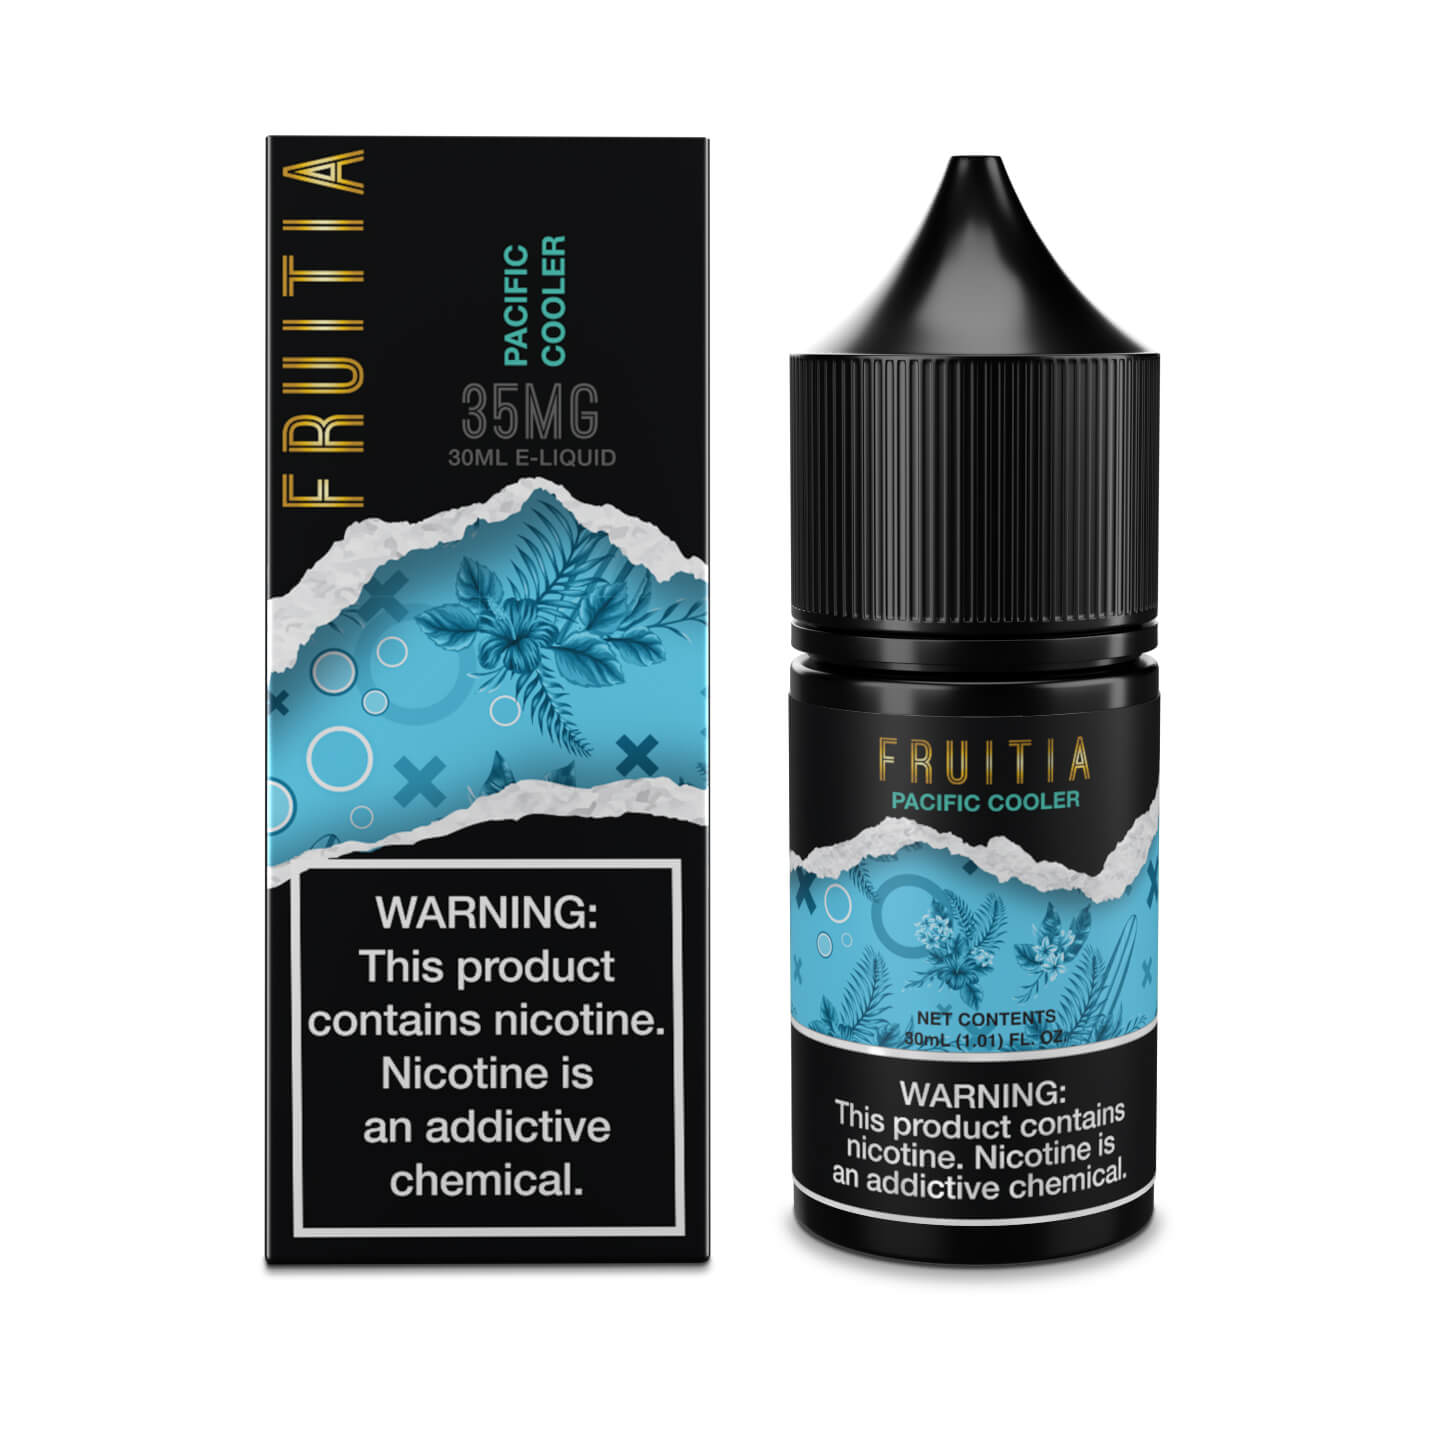 Pacific Cooler (30mL)